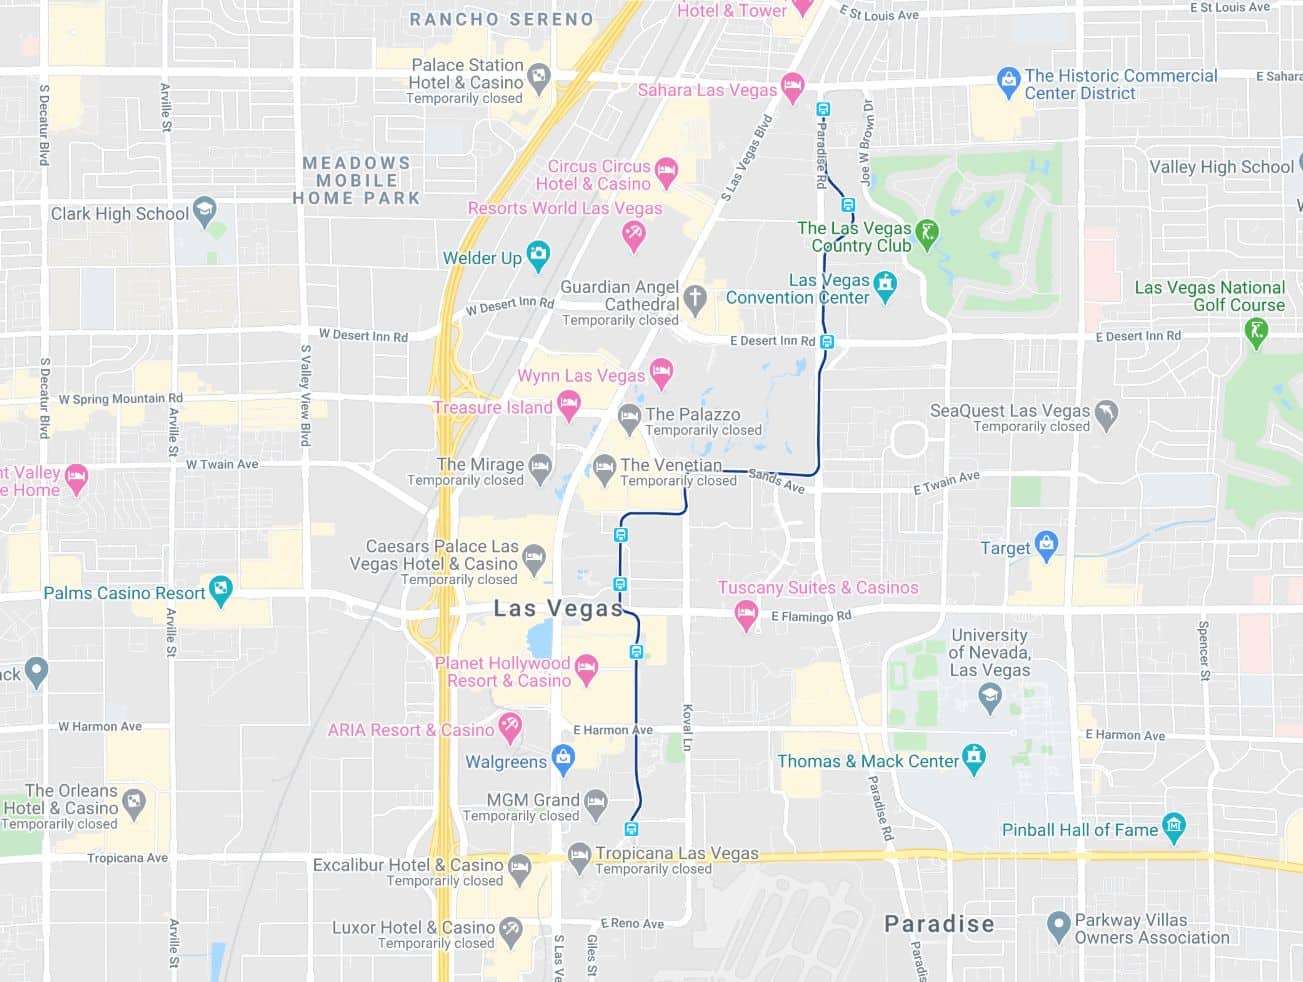 Las Vegas Monorail - Stops Map, Ticket Prices, Schedule, Hours, Cost, NV